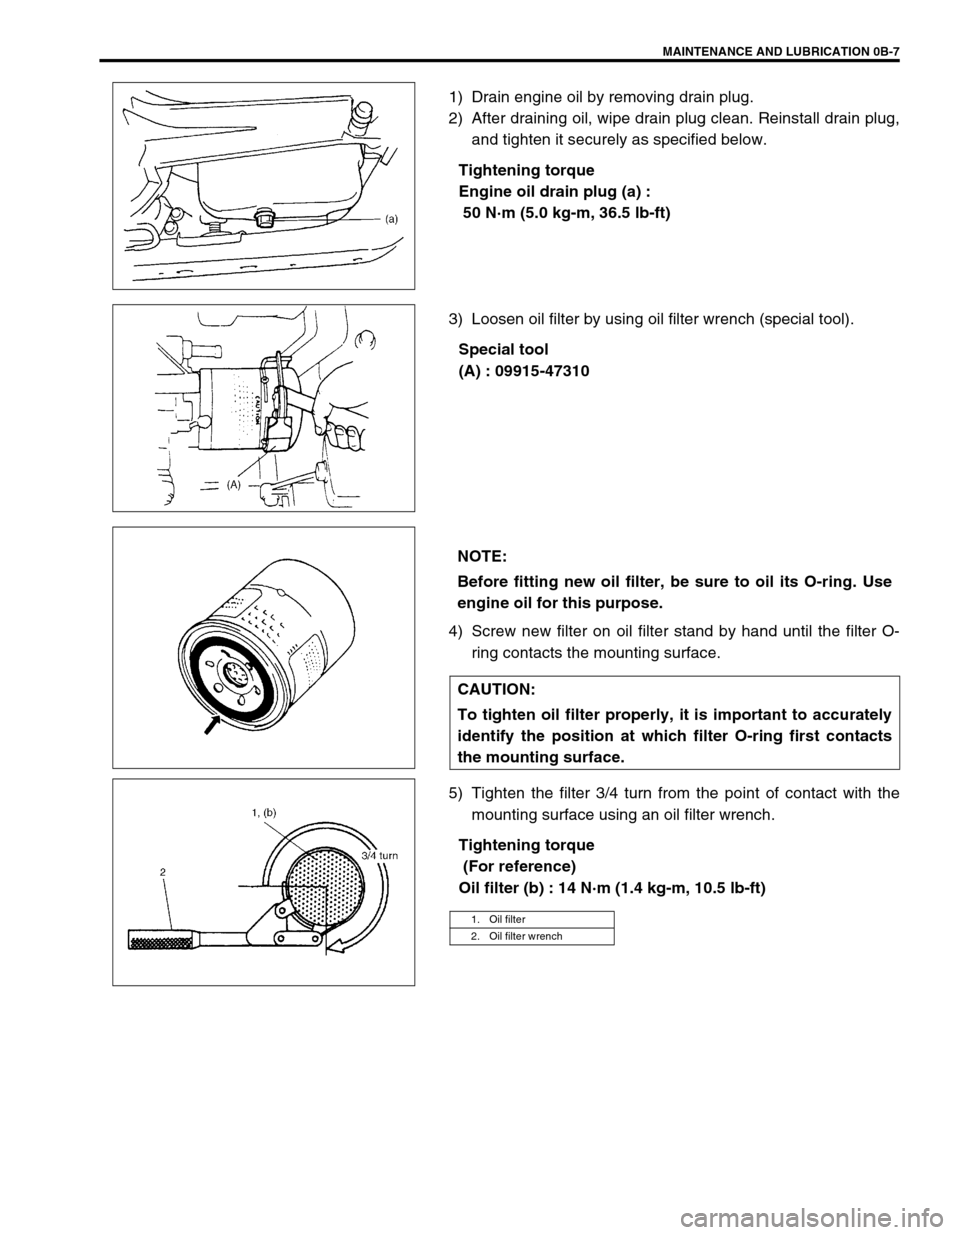 SUZUKI GRAND VITARA 2001 2.G Owners Manual MAINTENANCE AND LUBRICATION 0B-7
1) Drain engine oil by removing drain plug.
2) After draining oil, wipe drain plug clean. Reinstall drain plug,
and tighten it securely as specified below.
Tightening 